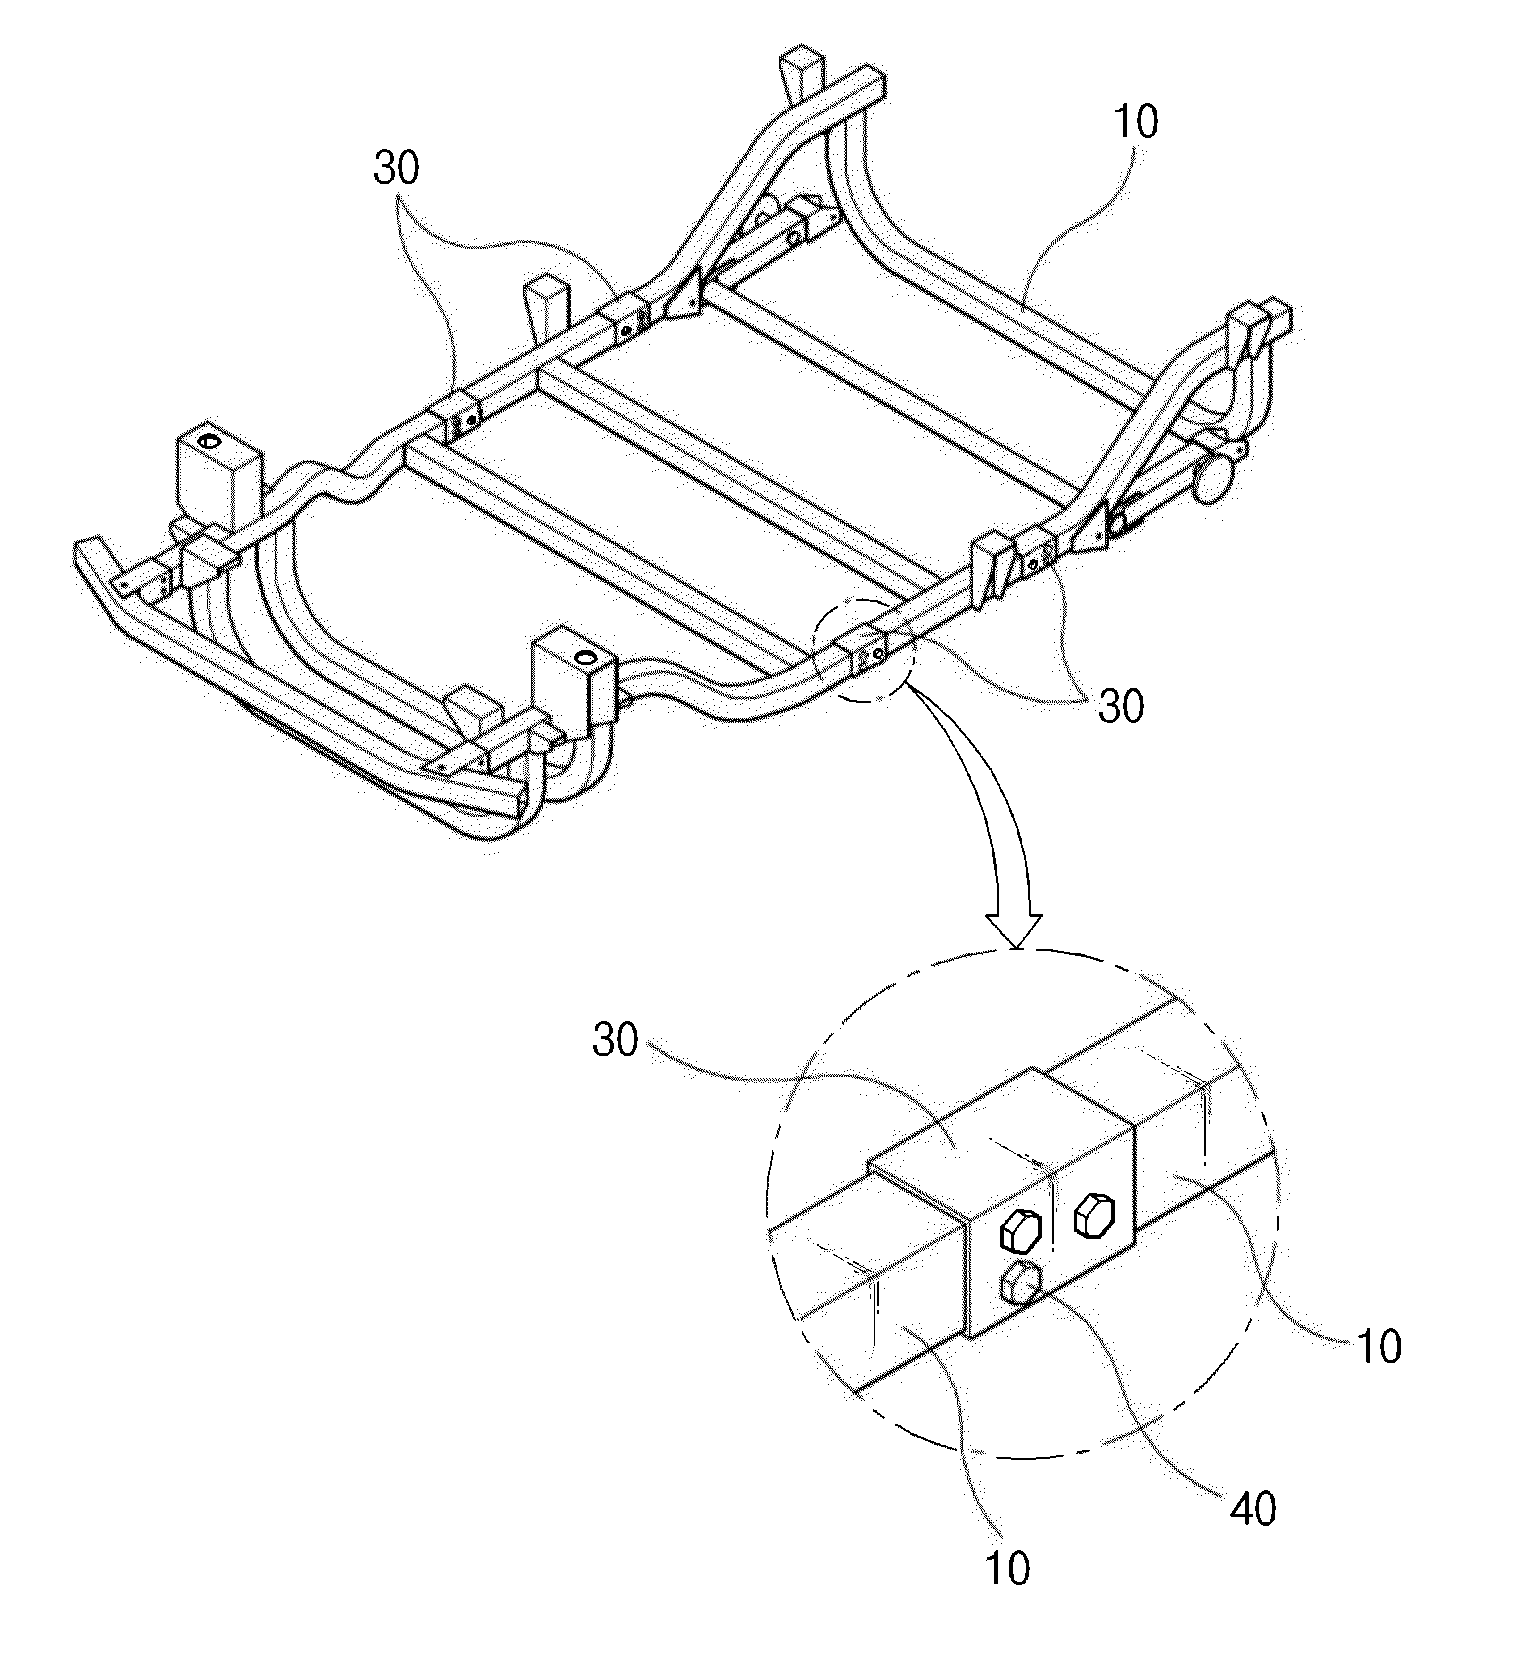 Chassis frame assembly structure for electrical vehicle for disabled person